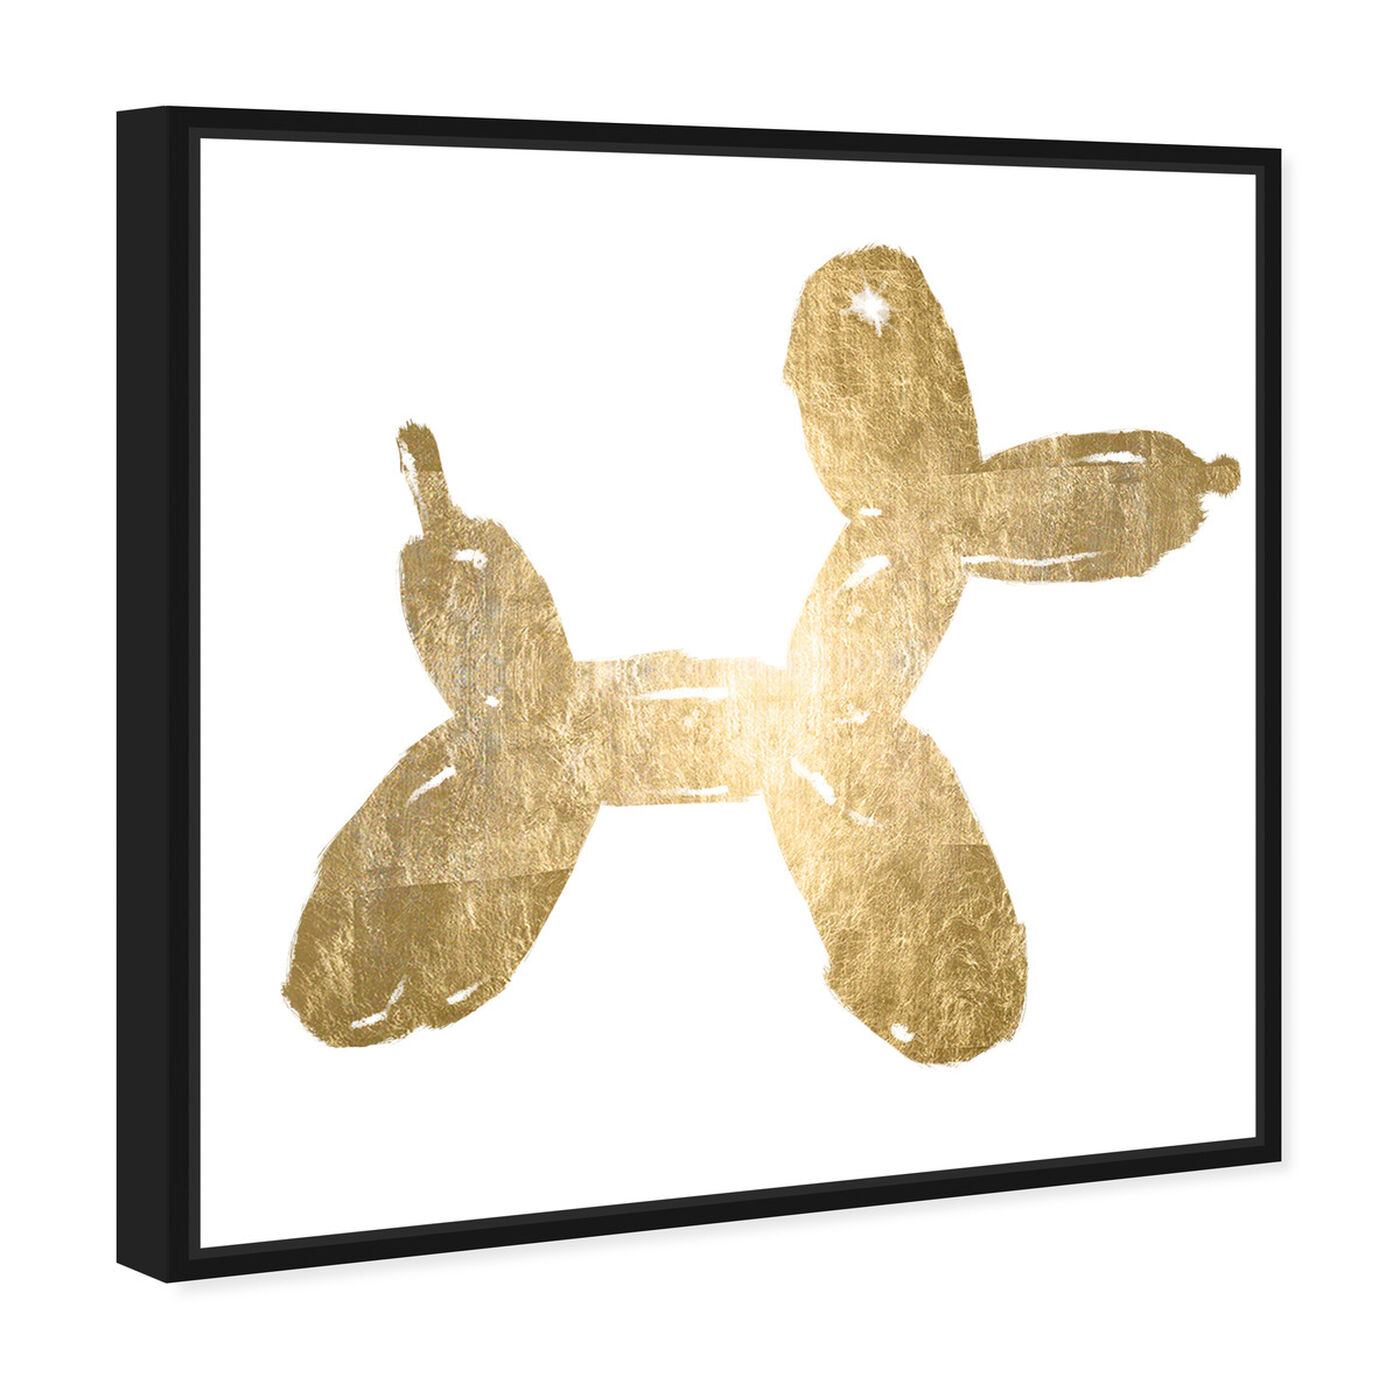 Angled view of Balloon Dog Photocopy Gold Foil featuring fashion and glam and lifestyle art.